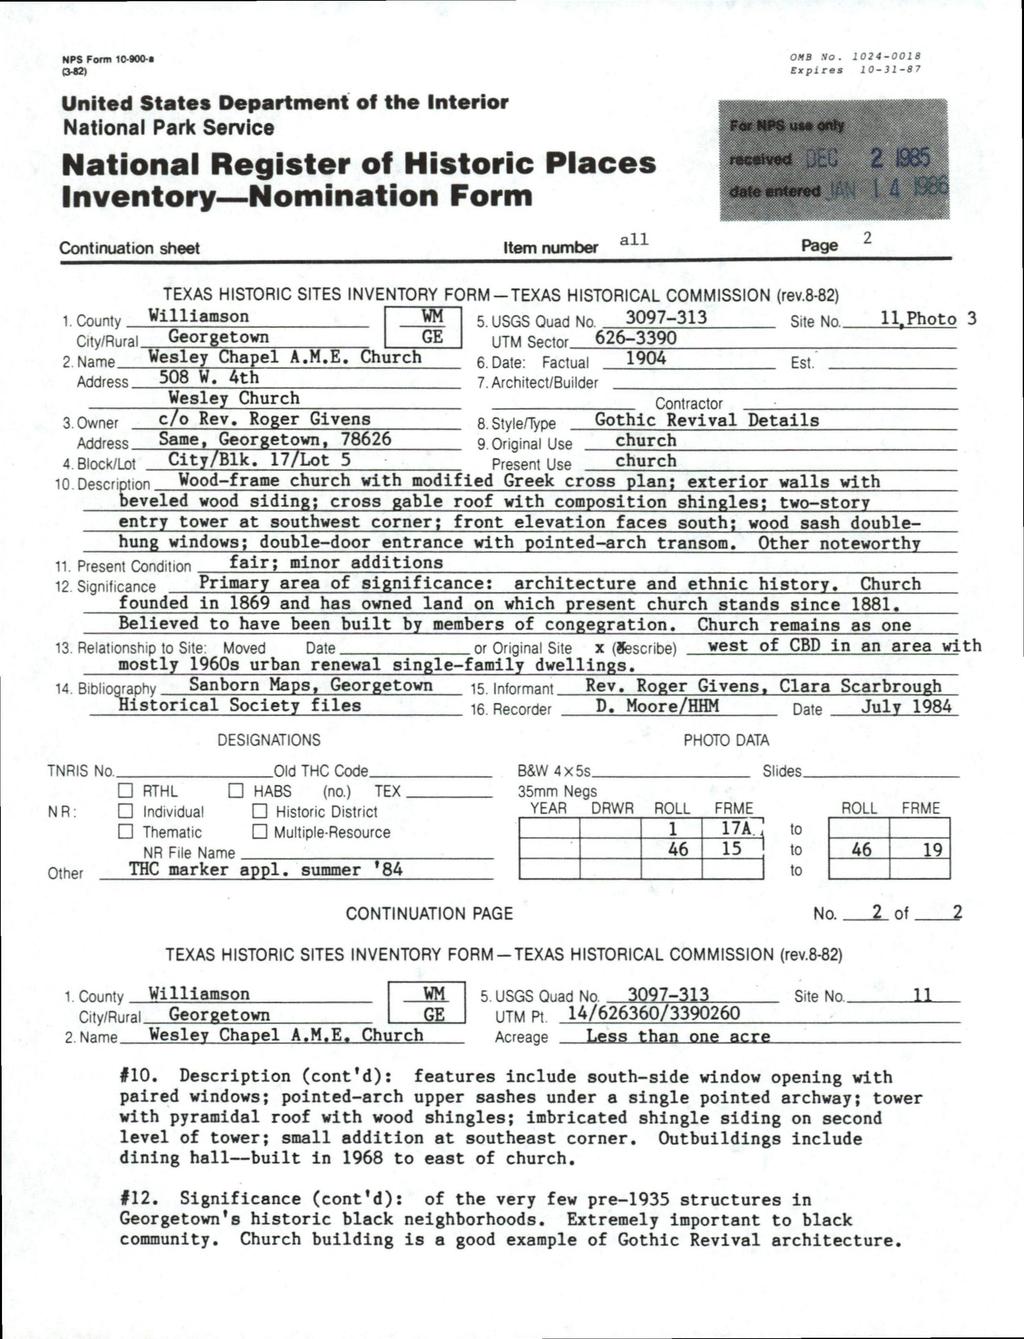 NPS Form 10-900-* 042) United States Department of the Interior National Park Service National Register of Historic Places Inventory Nomination Form OMB No.